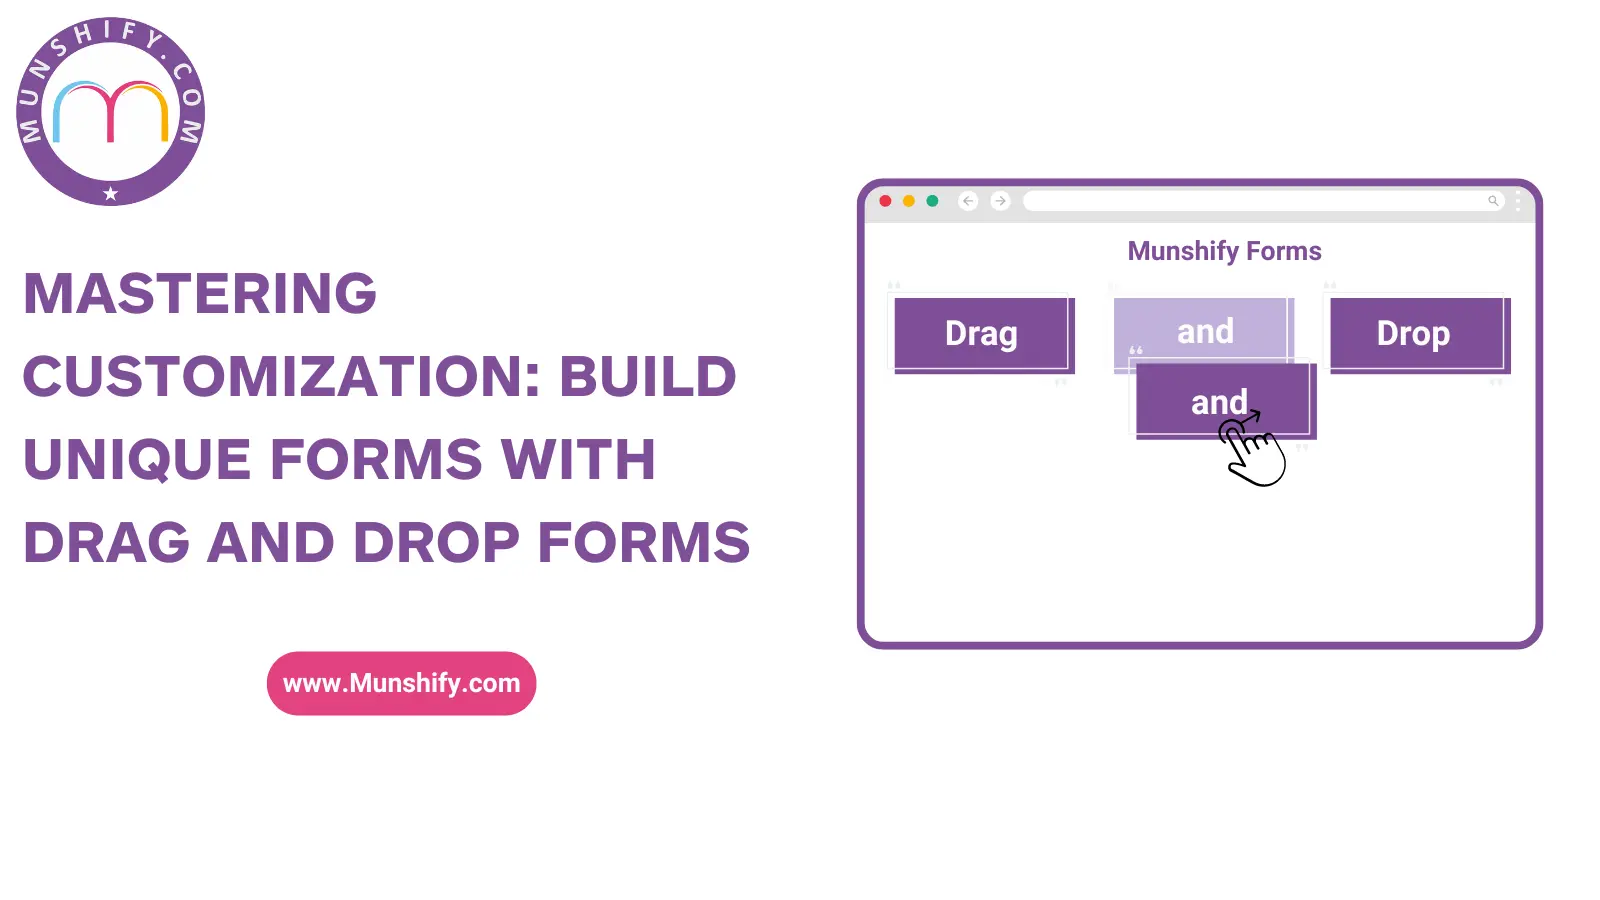 Mastering Customization: Build Unique Forms with Drag and Drop Forms